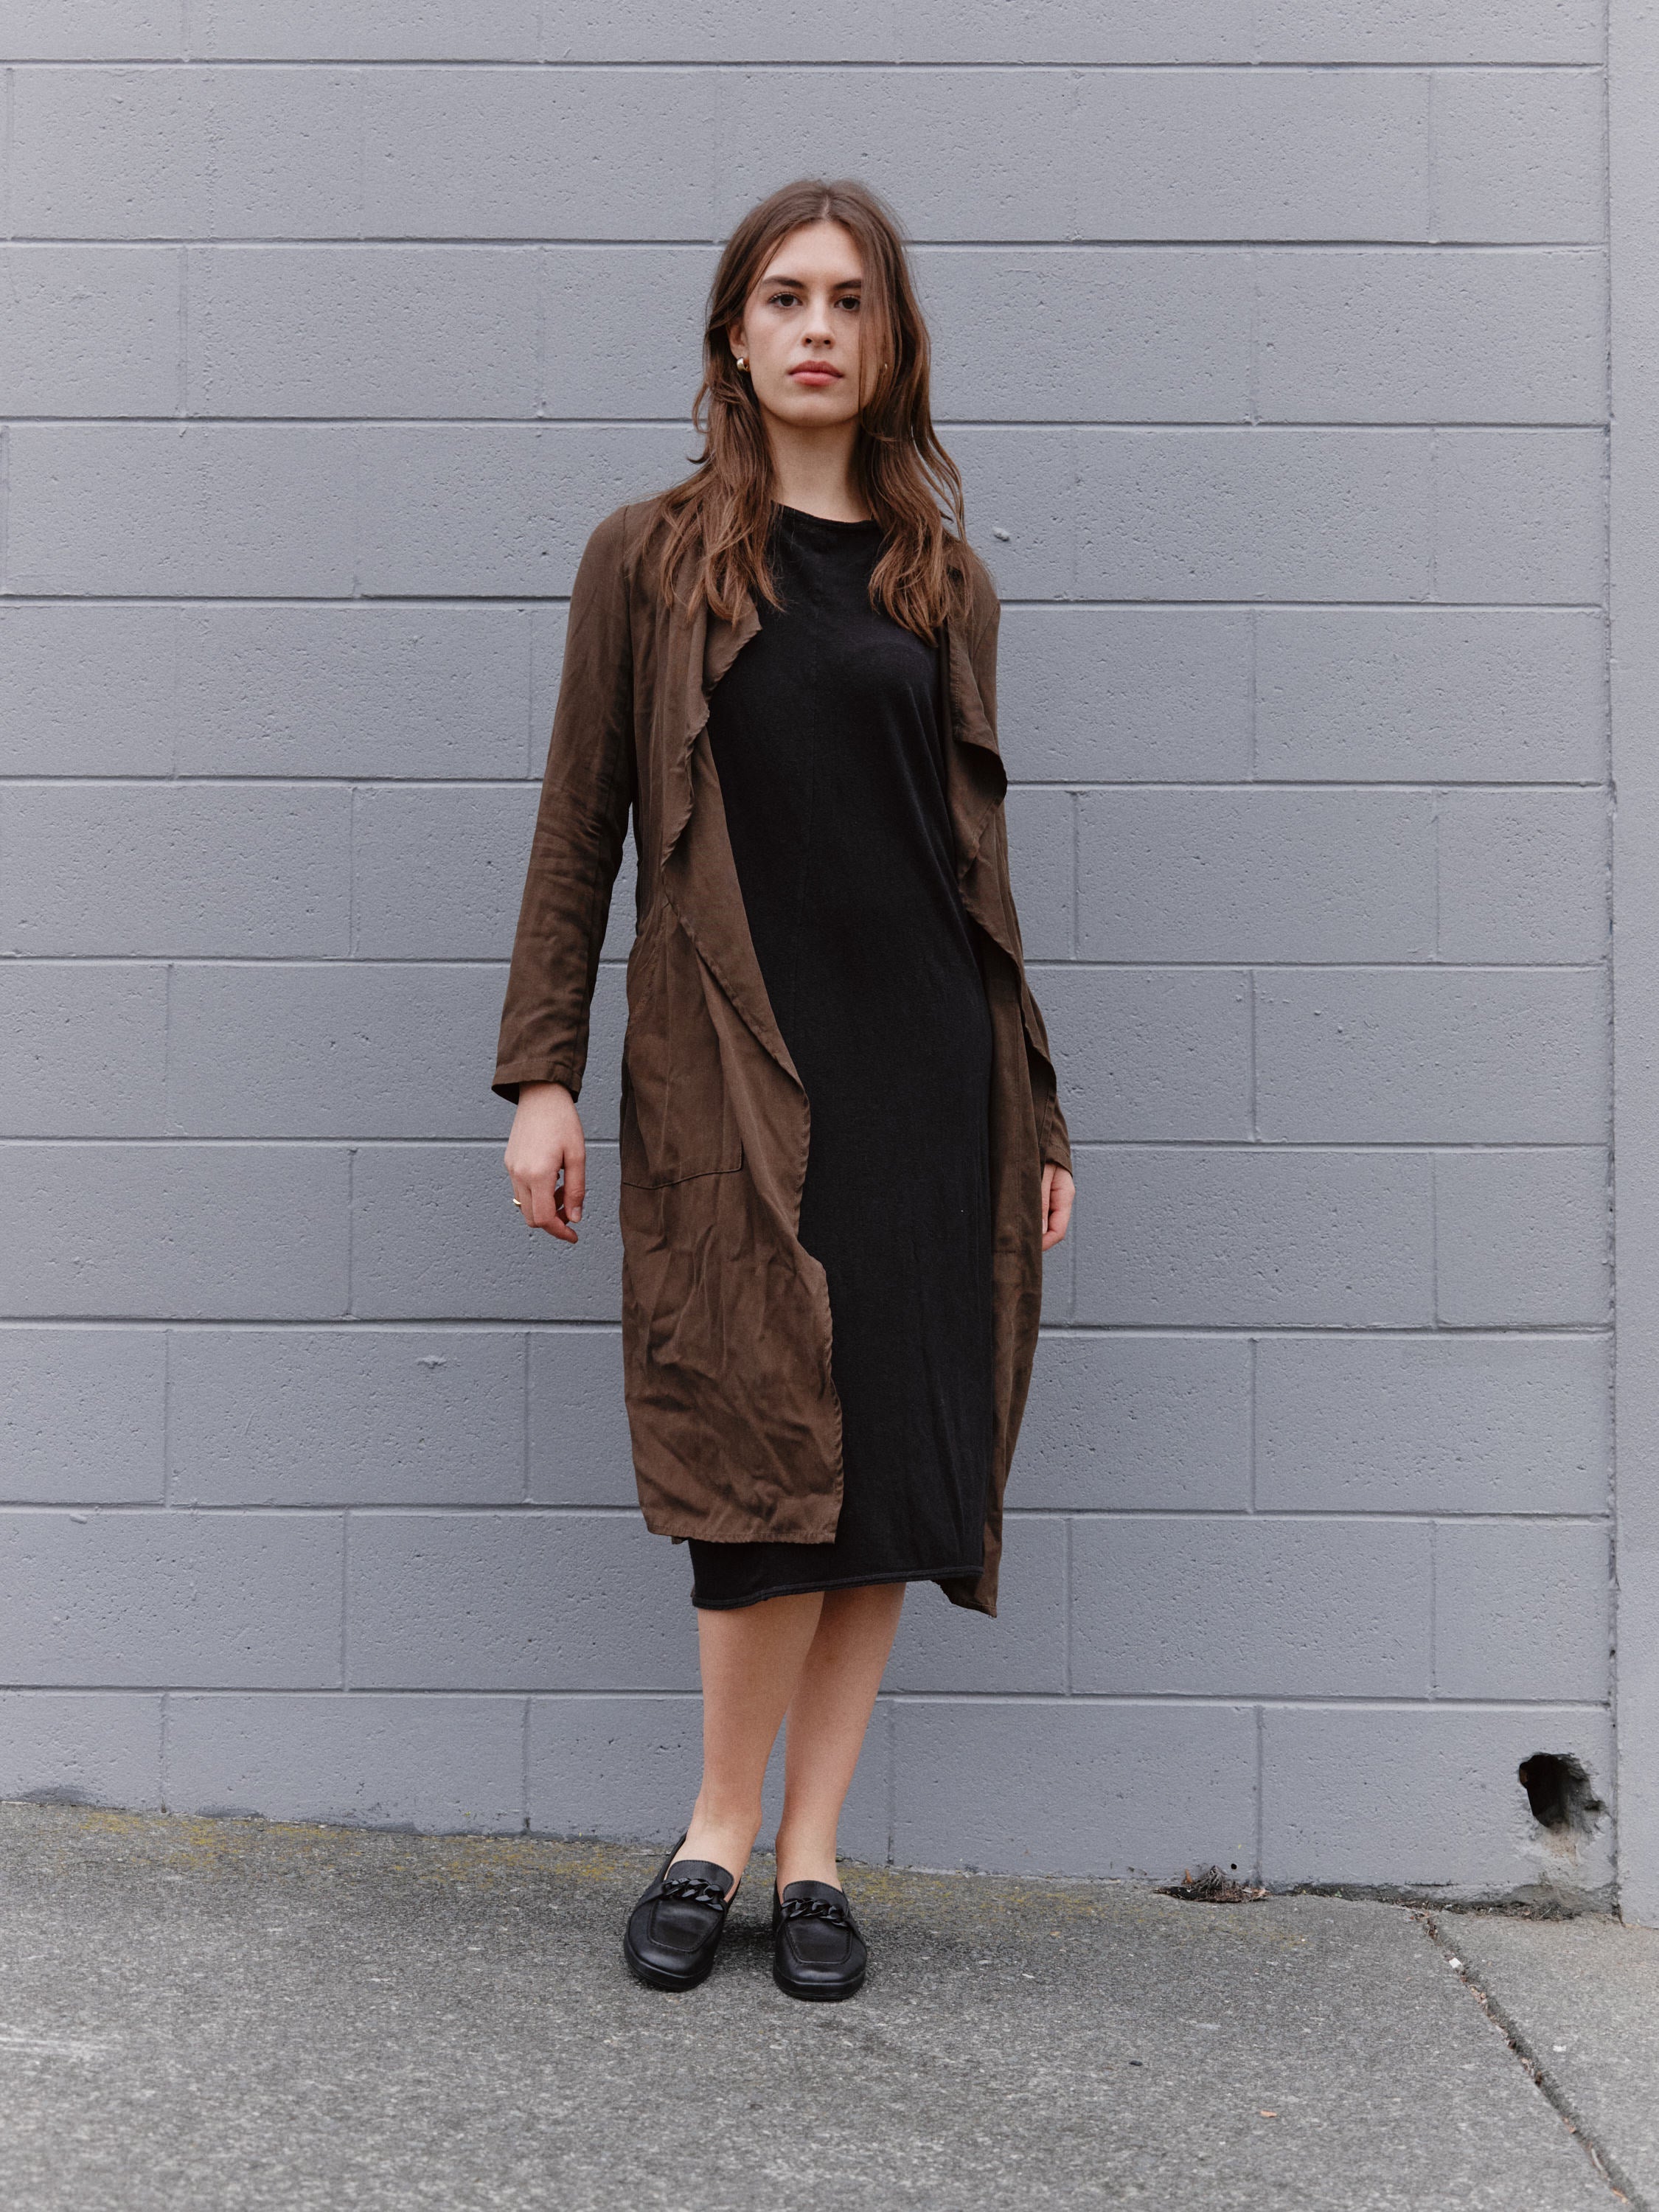 Gracie Taylor. Glassons trench